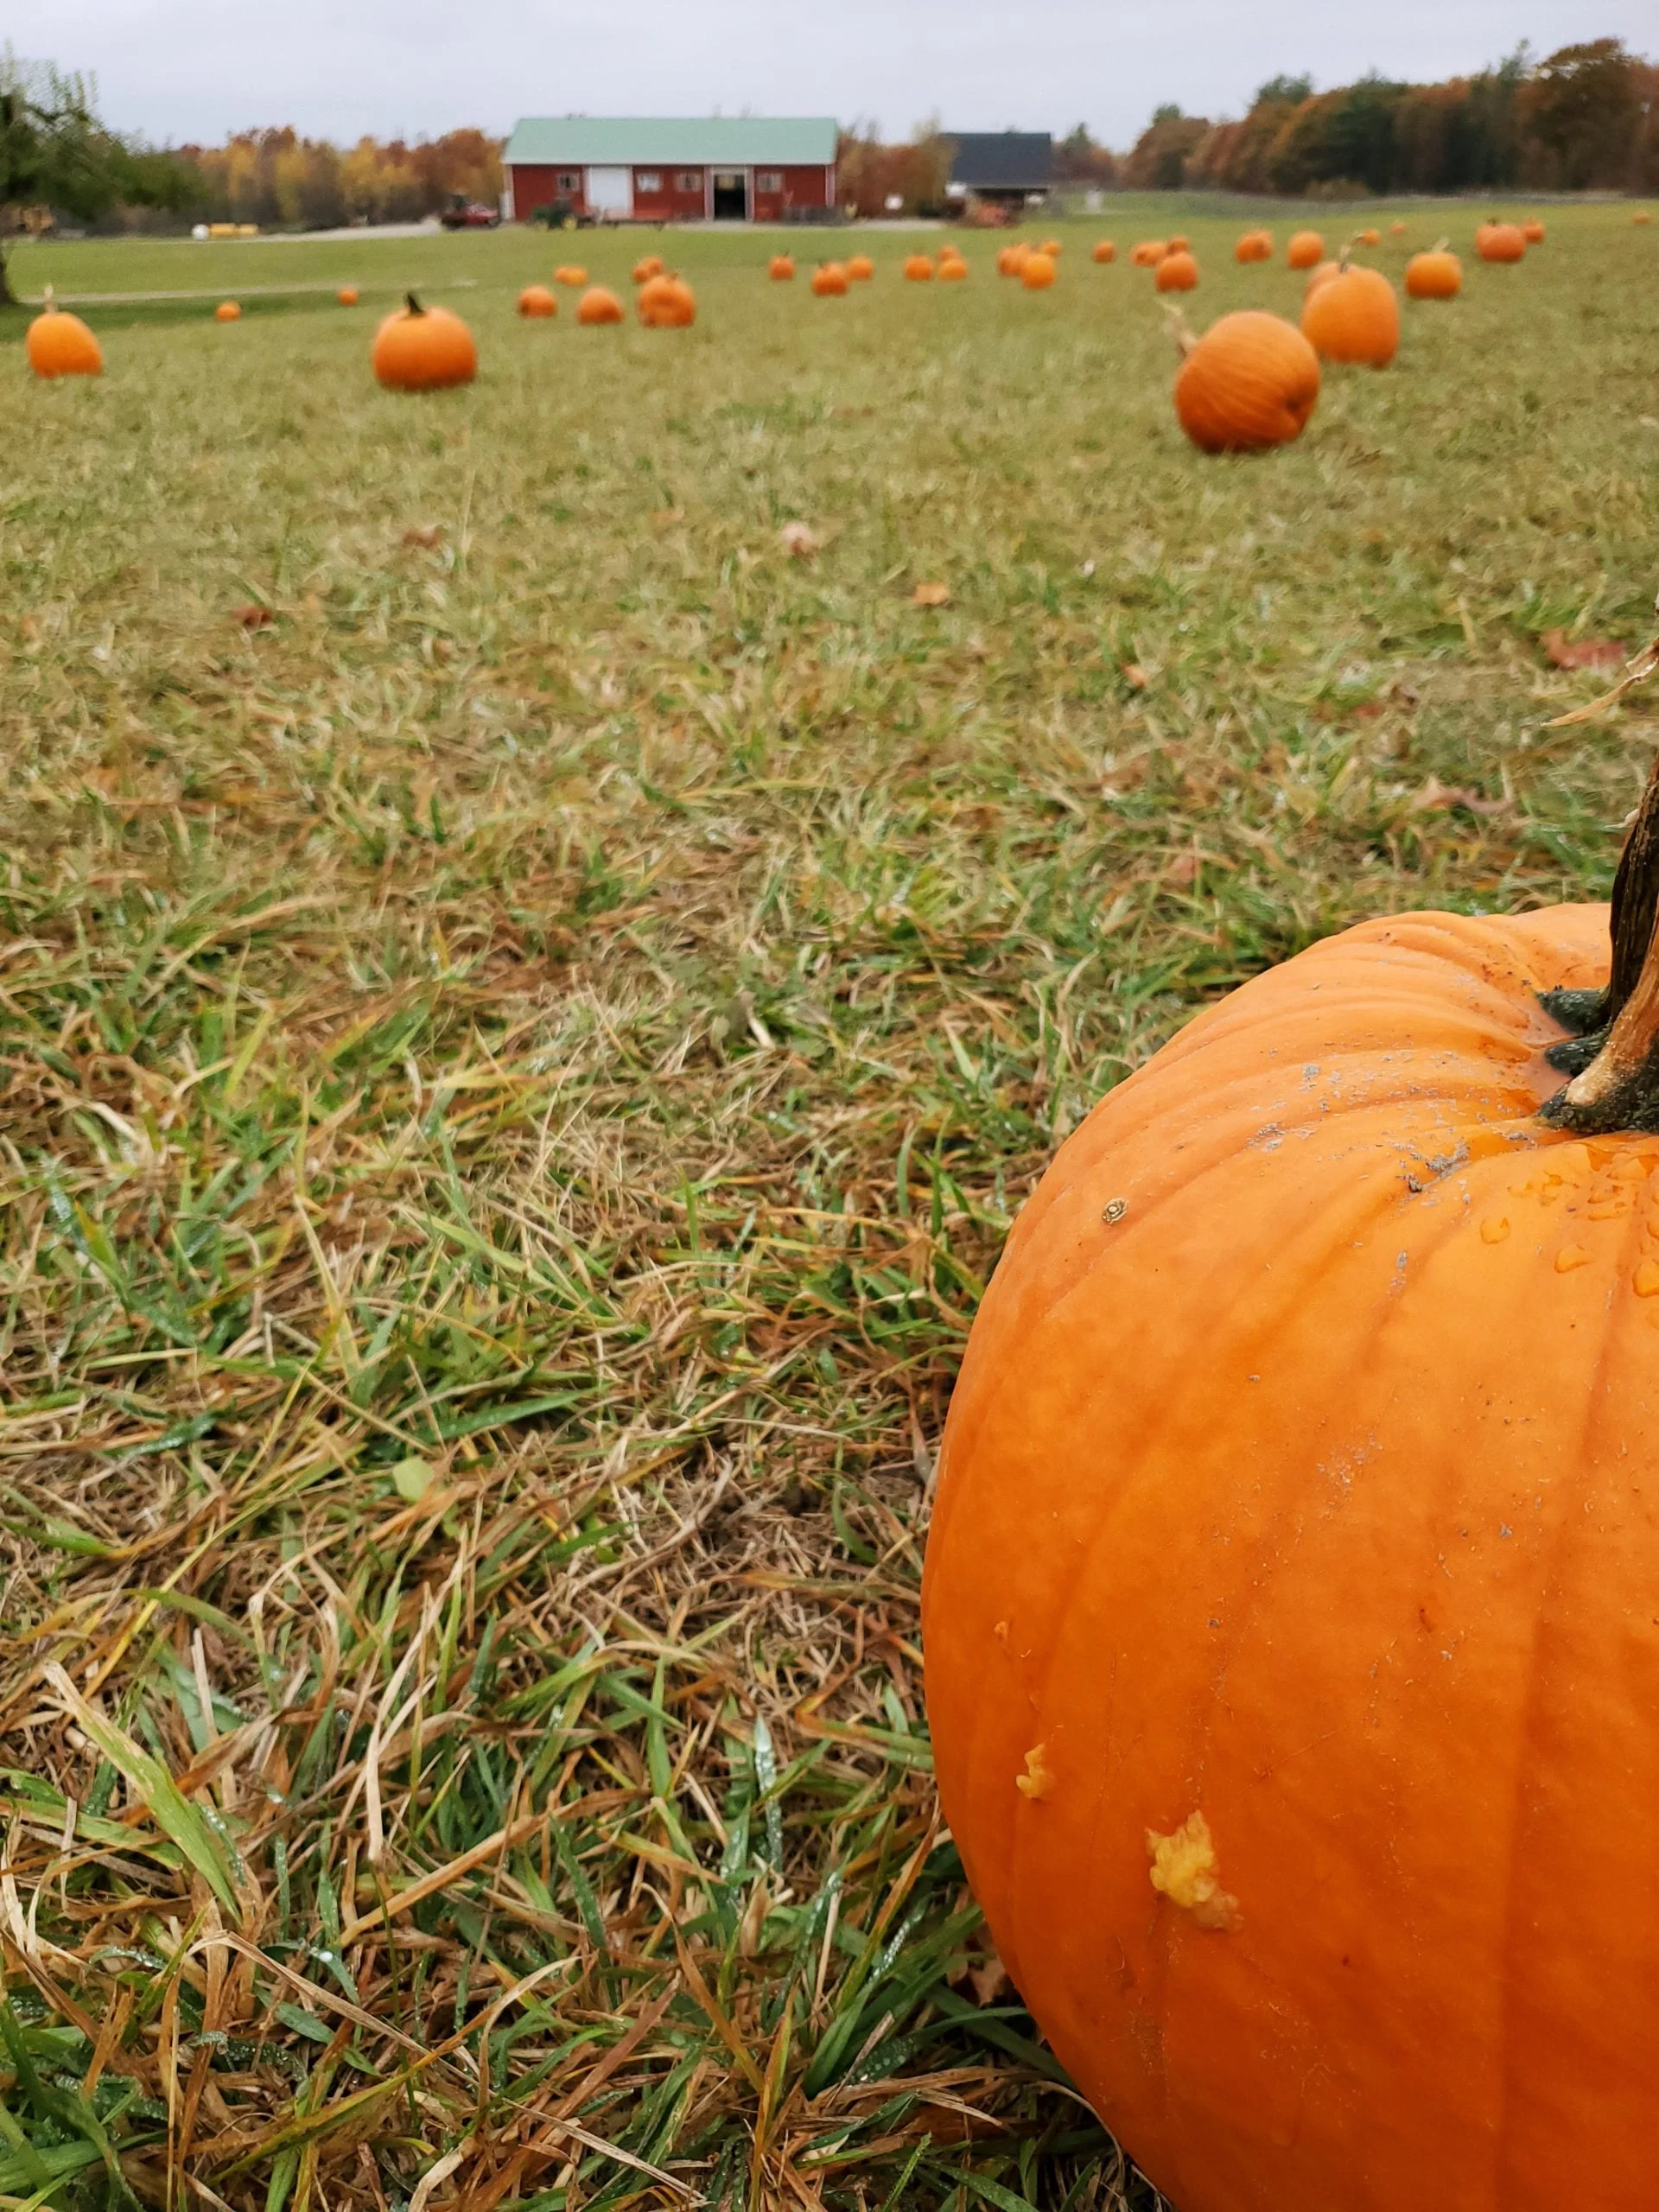 Camera focuses on a pumpkin near the edge of the image with several others in the field stretching through the background. A red bar is at the far edge of the field.